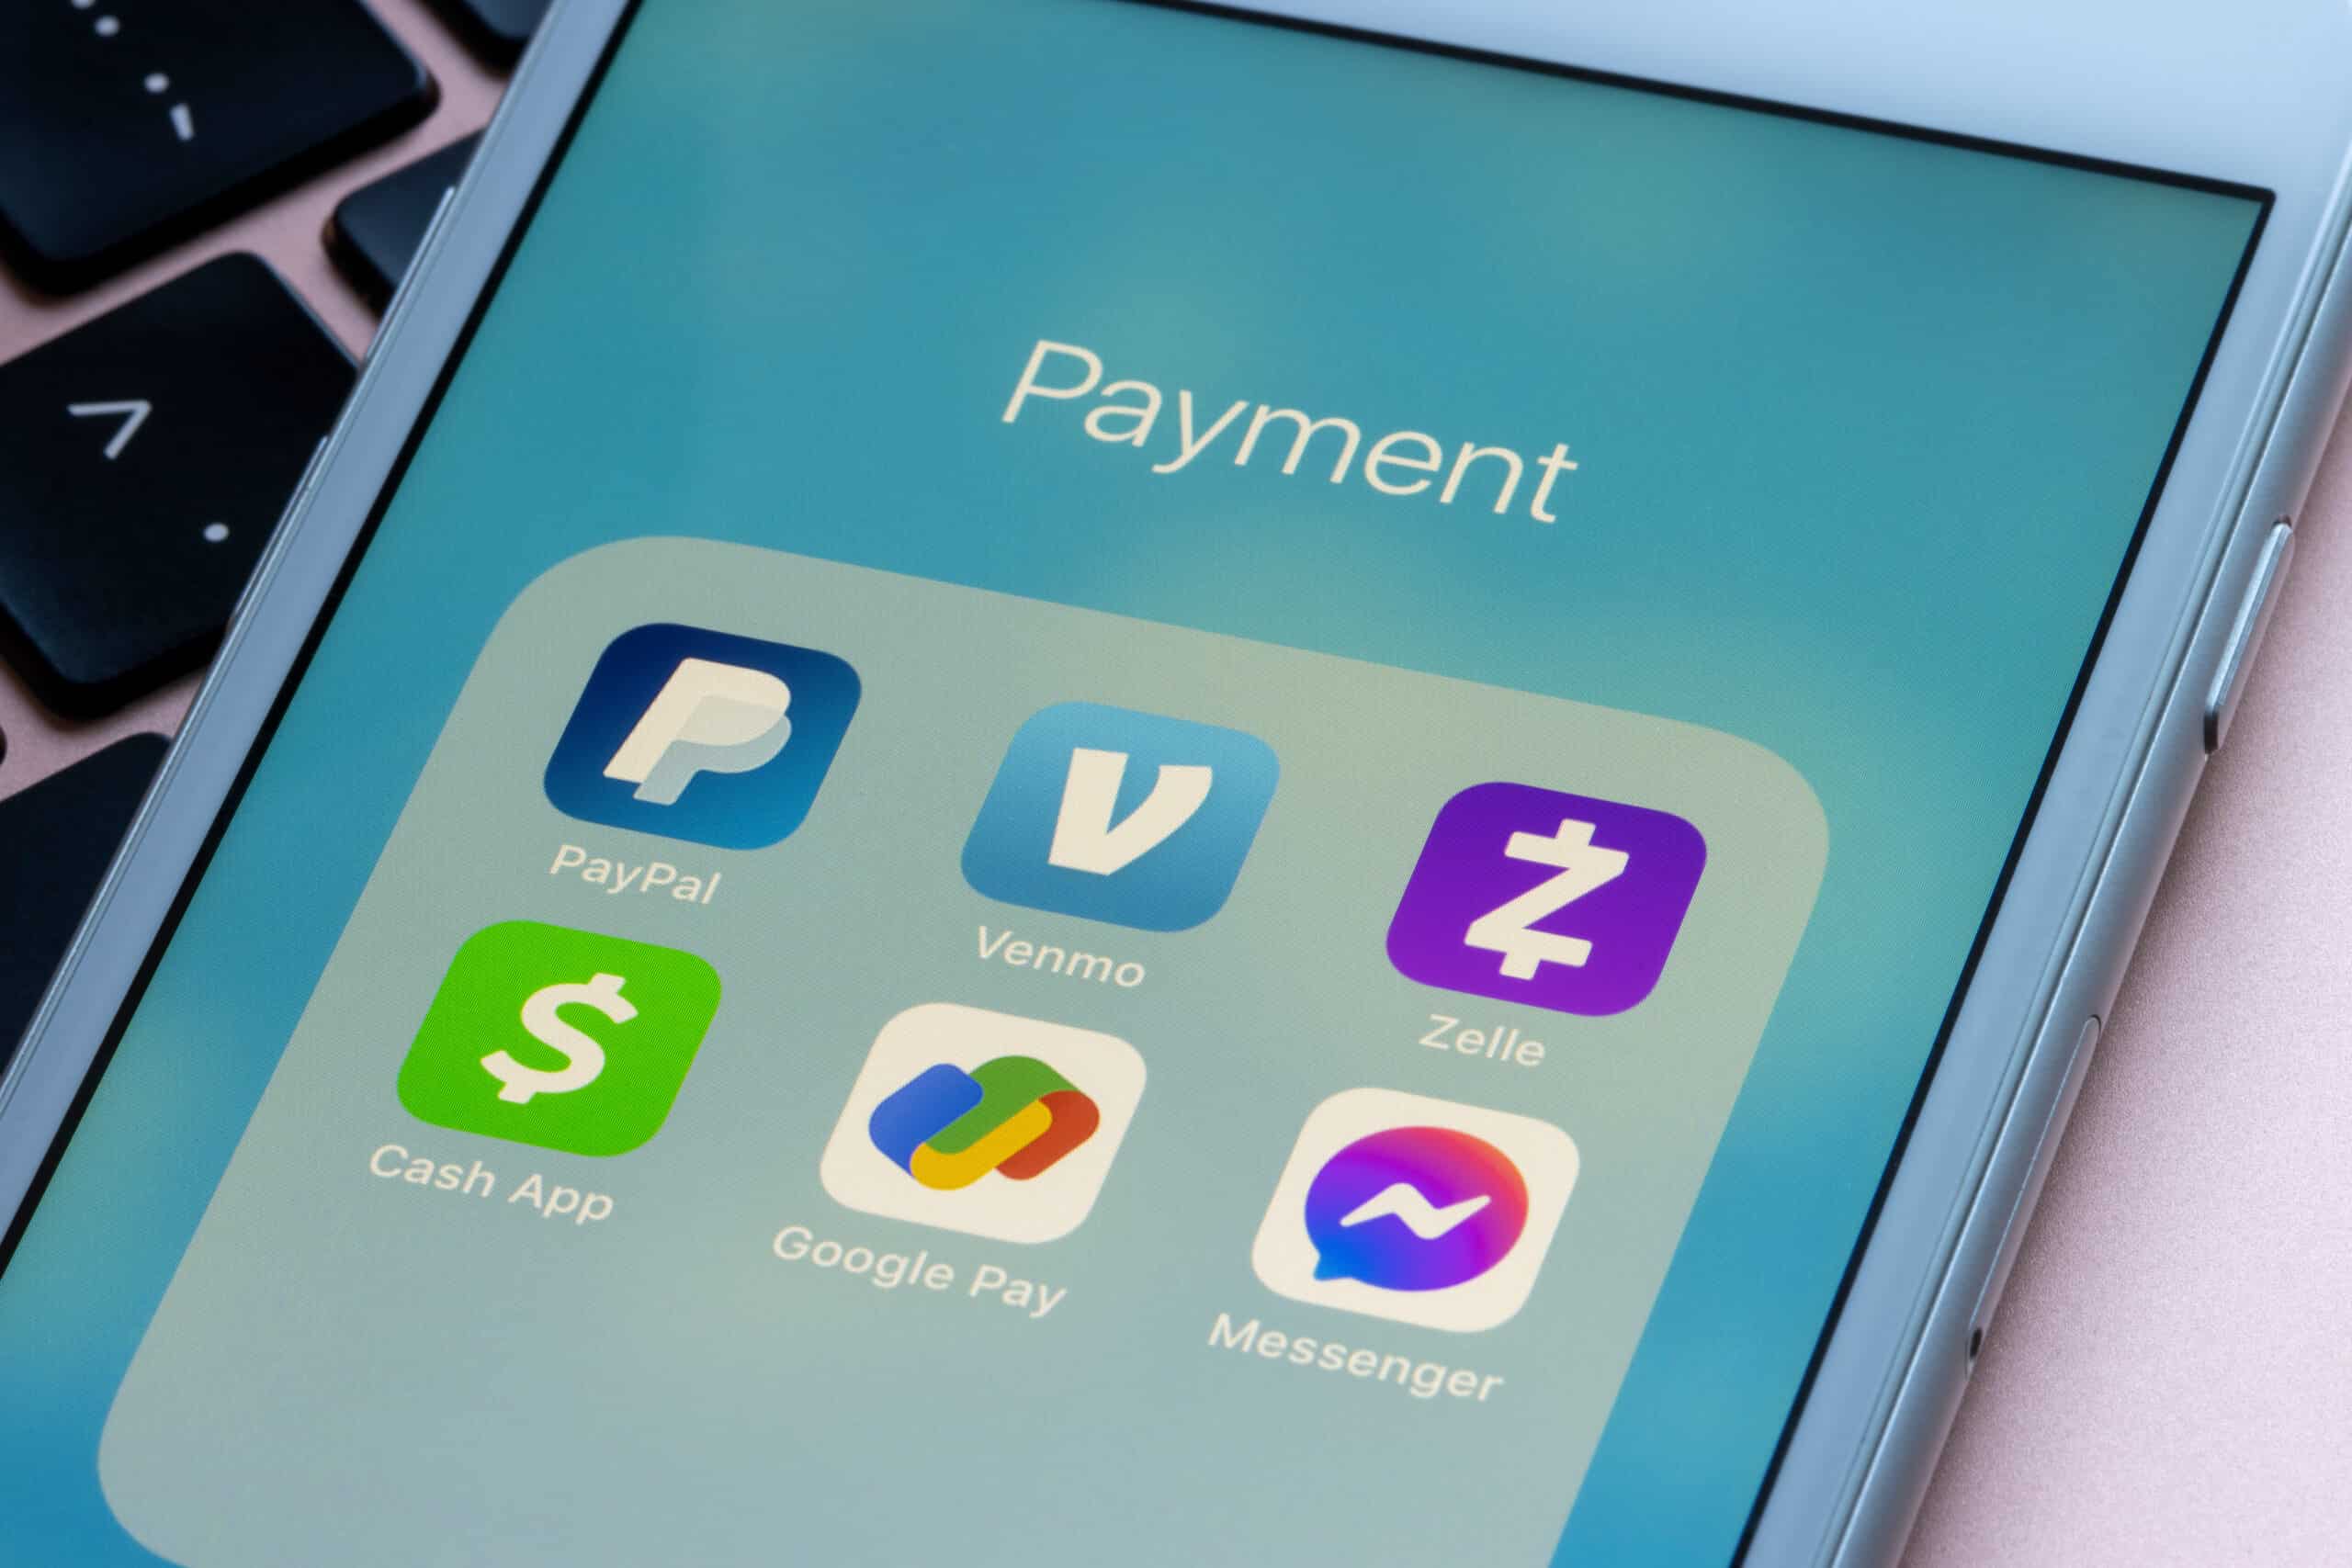 Parents shift to Venmo, PayPal, Zelle to pay teens | Fox Business